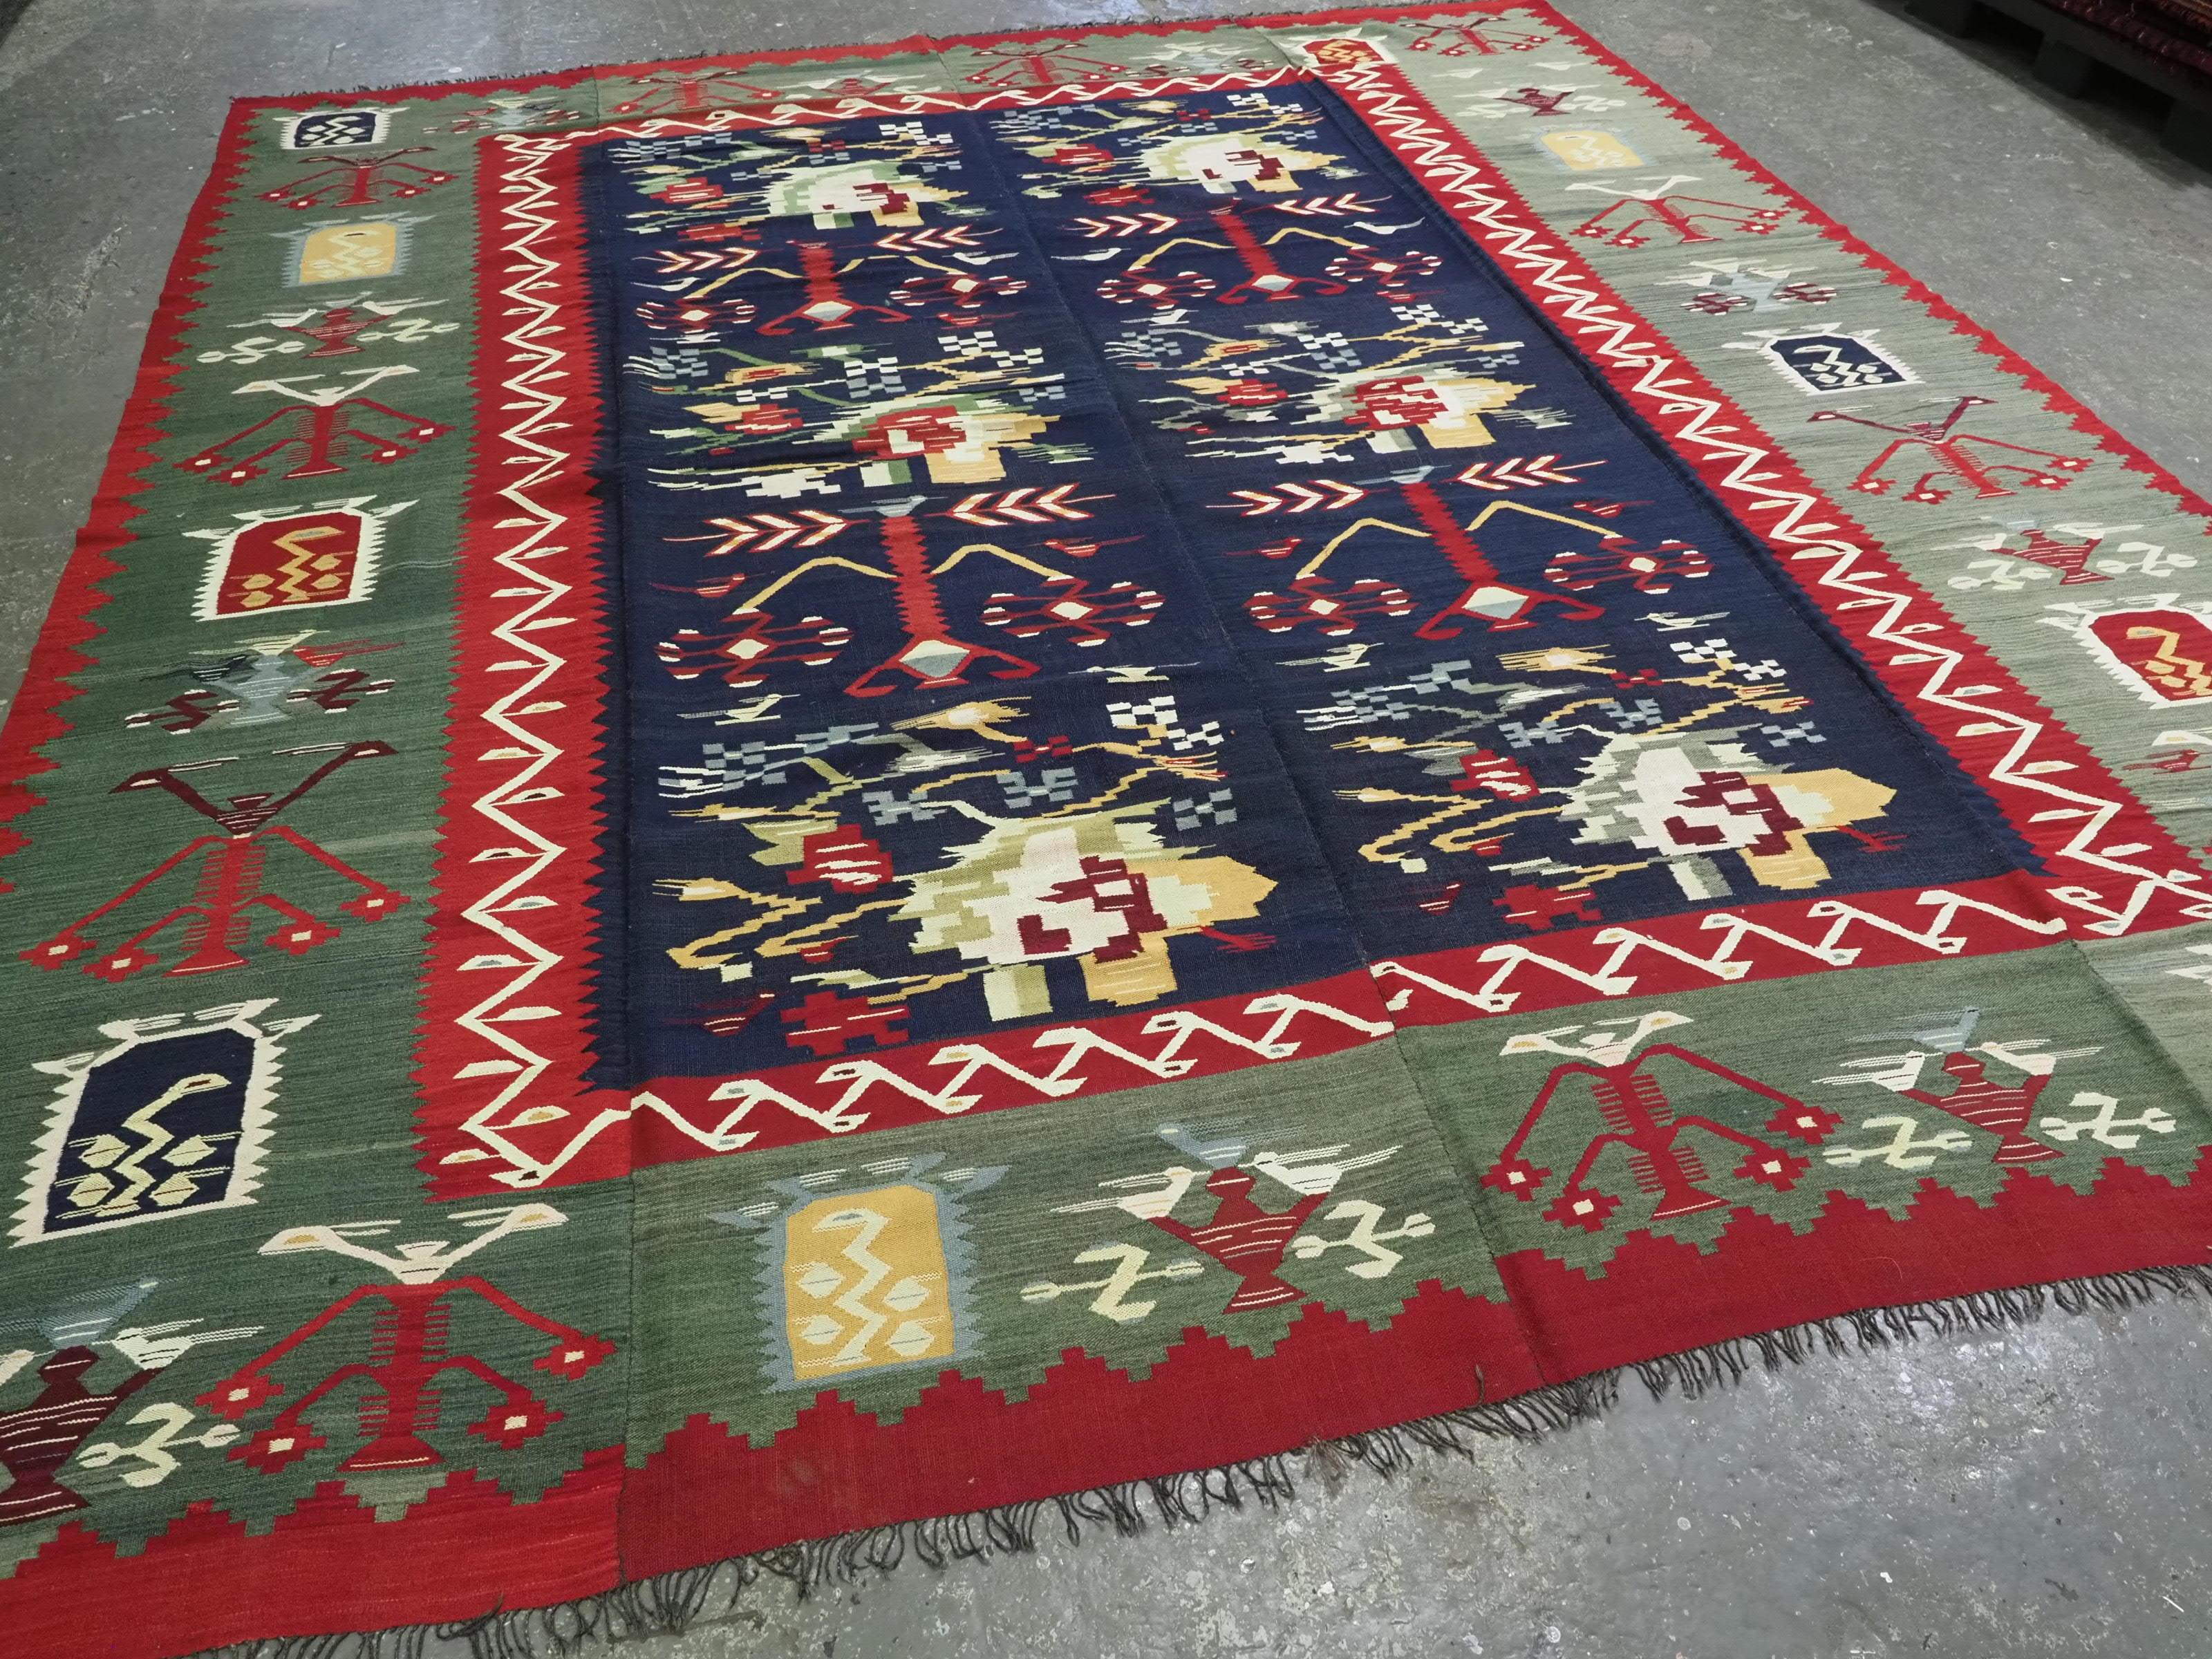 Size: 11ft 9in x 10ft 2in (357 x 310cm).

Rare antique Pirot / Sarkoy kilim of scarce design. A kilim of large room size, a truly outstanding example.

Circa 1920.

Pirot kilims are also known as Sarkoy or Sharkoy, they originate from the town of